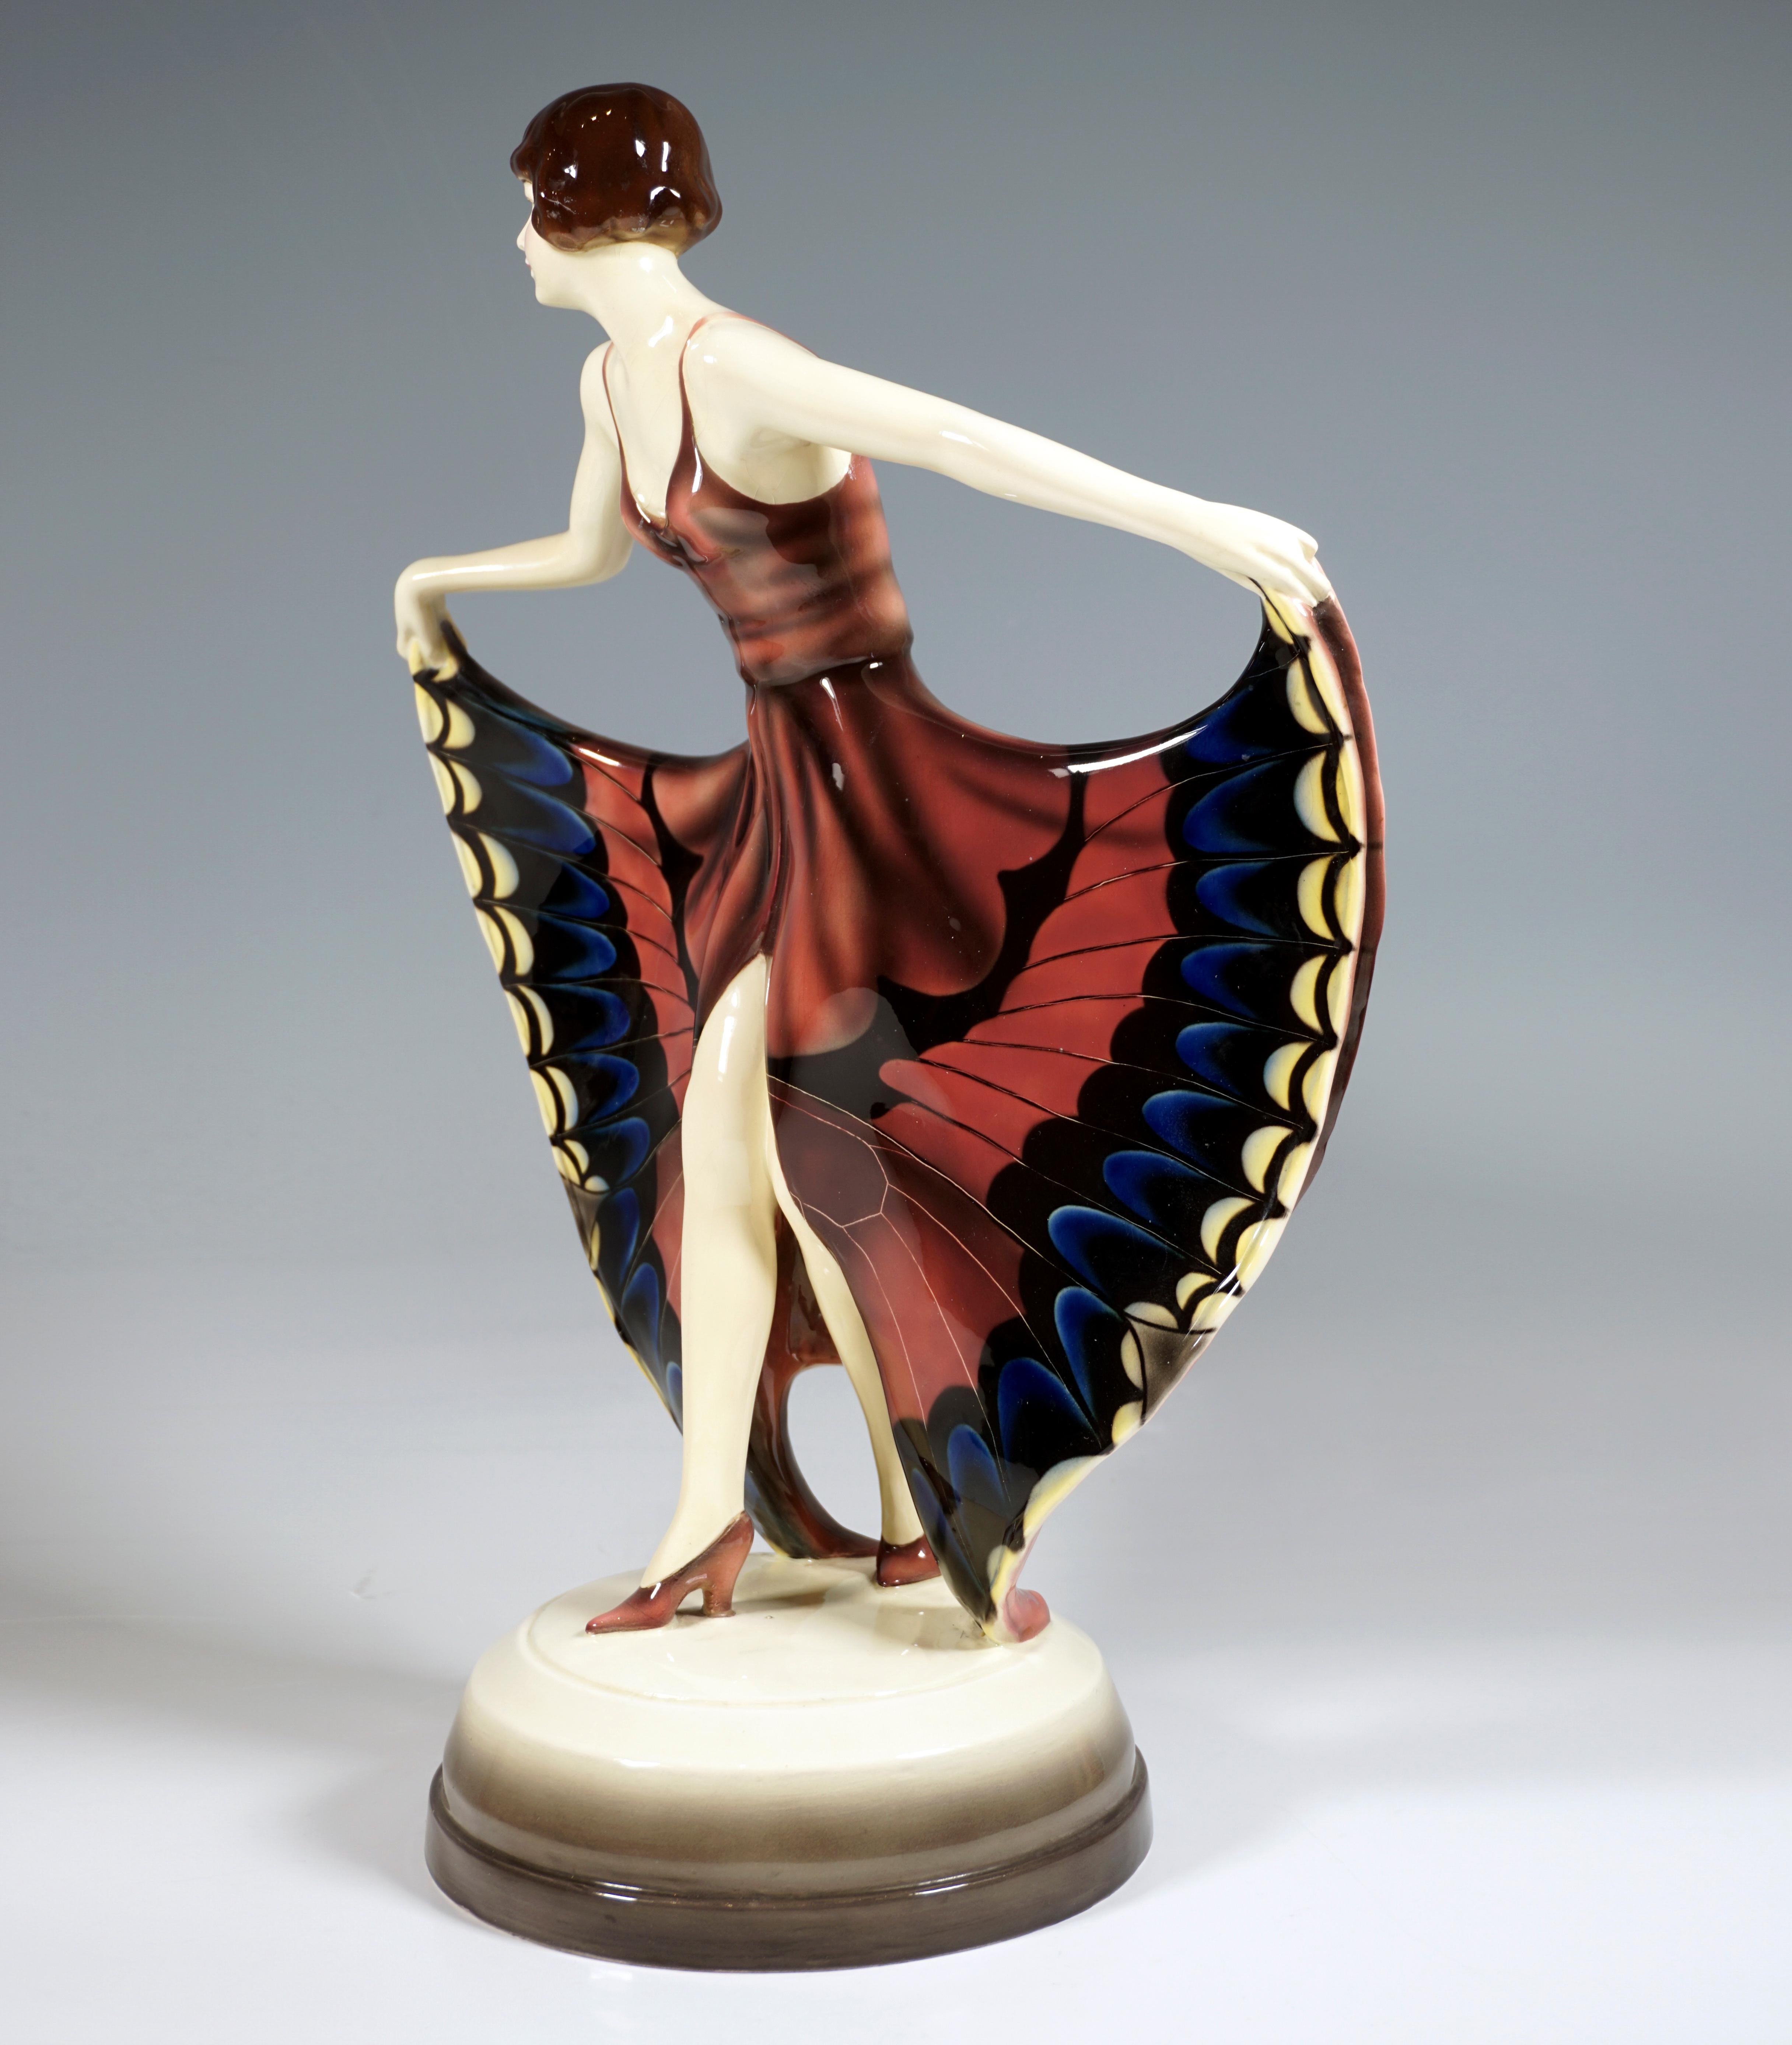 Rare Goldscheider Art Deco ceramic figure of the 1920's: 
Young dancer with pageboy hairstyle, leaning slightly forward and looking to the right, putting her right leg forward and holding the high slit skirt with butterfly decoration like wings